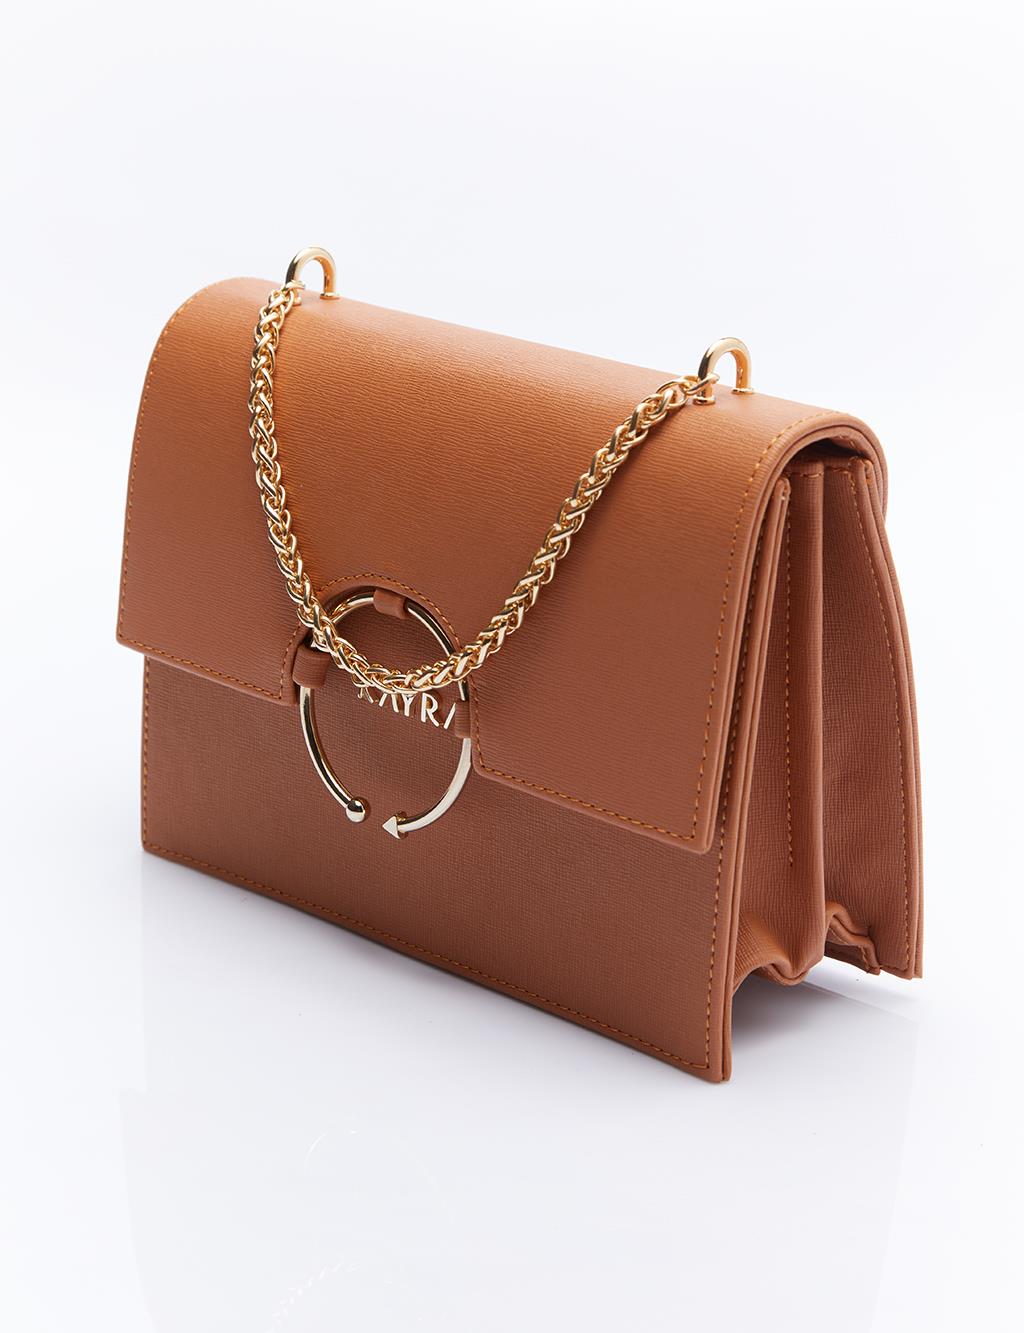 Designer Cover Chain Handle Bag Brown